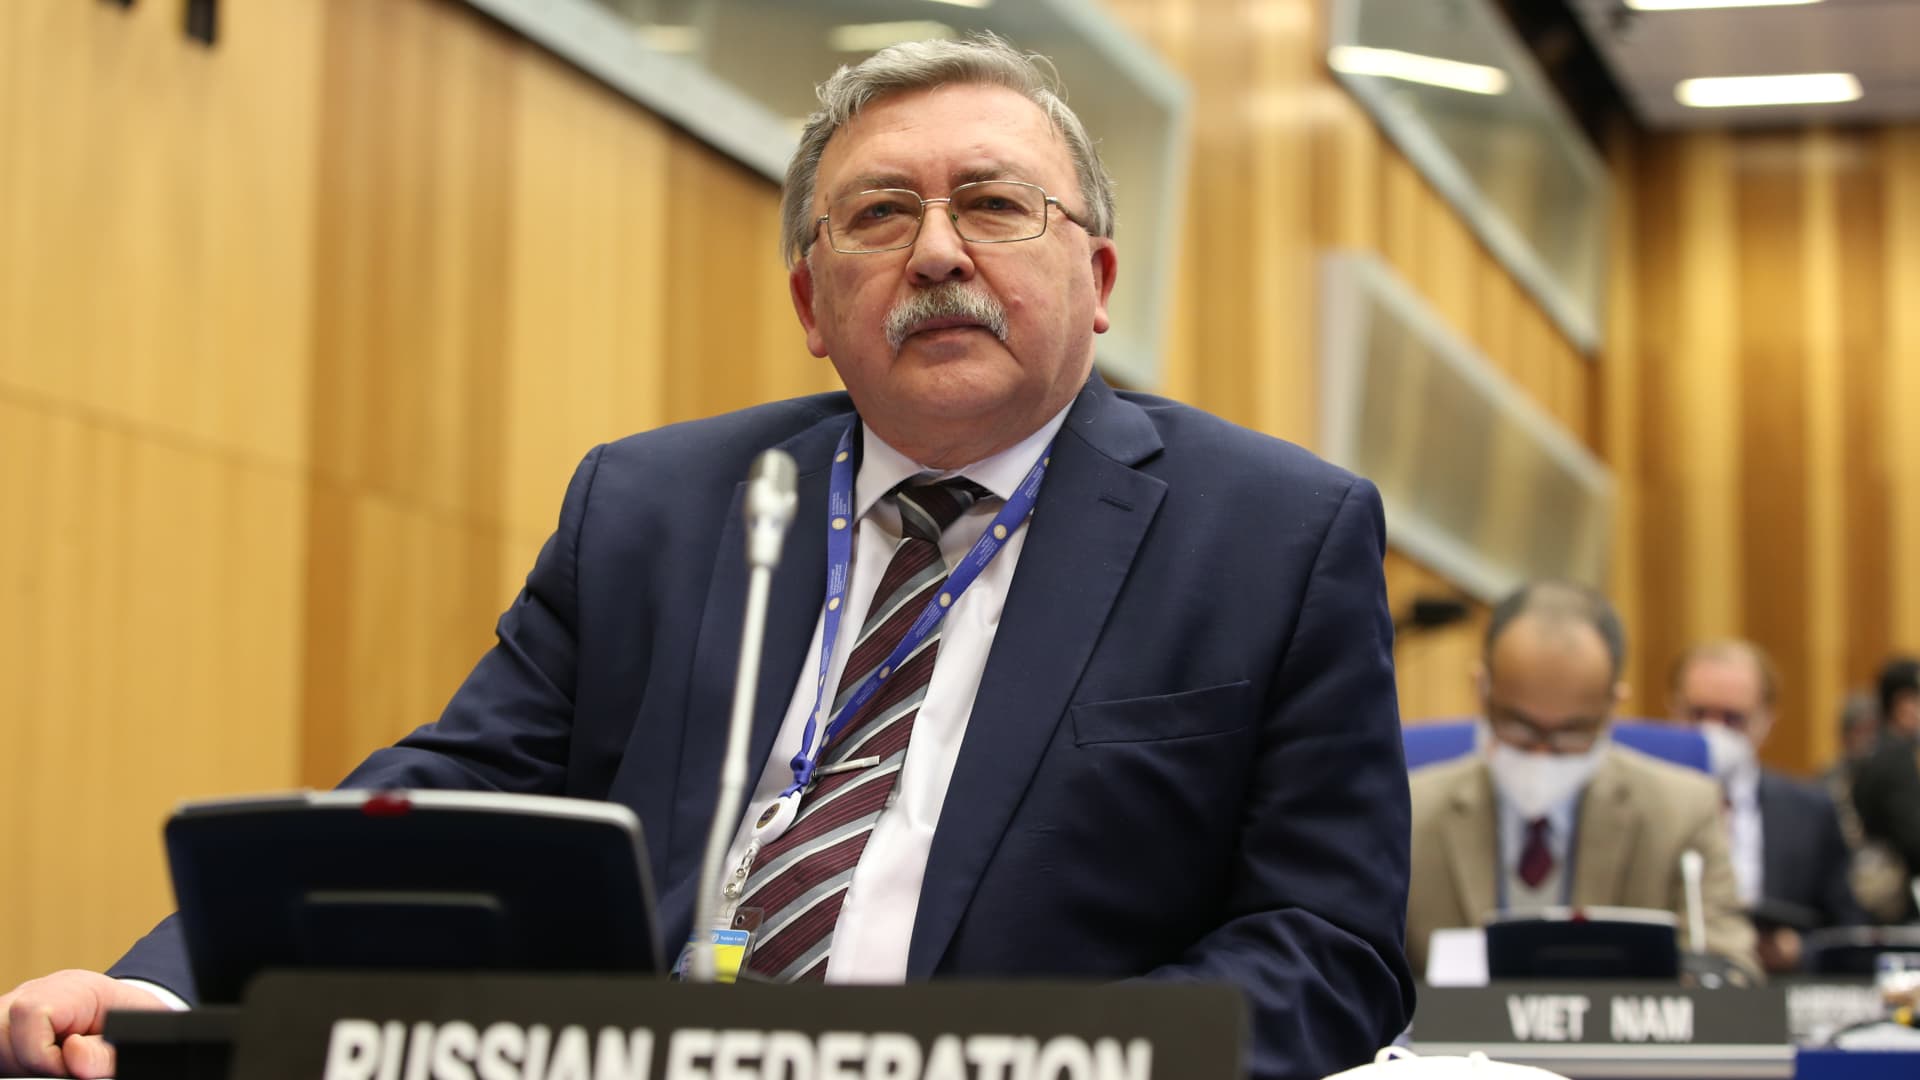 Russia's Governor to the International Atomic Energy Agency, Mikhail Ulyanov attends the IAEA Board of Governors meeting on the situations in Ukraine and Iran's nuclear activities at the IAEA headquarters IAEA headquarters of the UN seat in Vienna, Austria, on March 7, 2022.